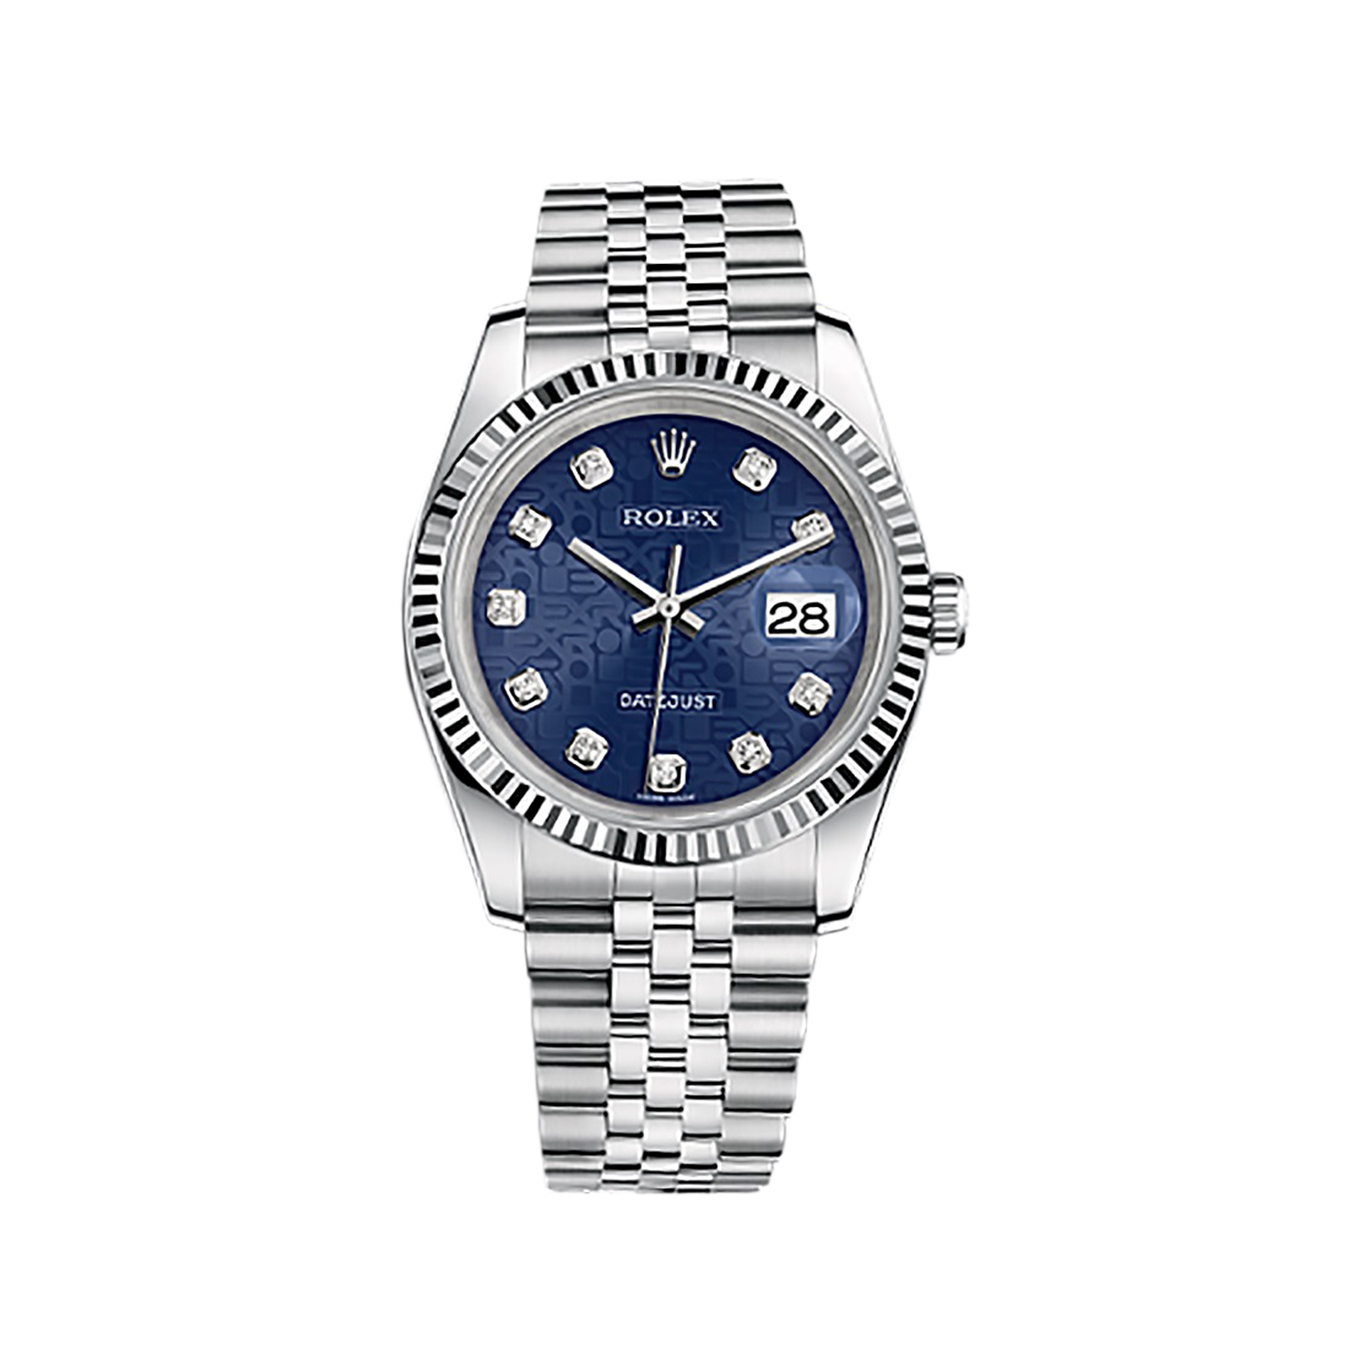 Datejust 36 116234 White Gold & Stainless Steel Watch (Blue Jubilee Design Set with Diamonds) - Click Image to Close